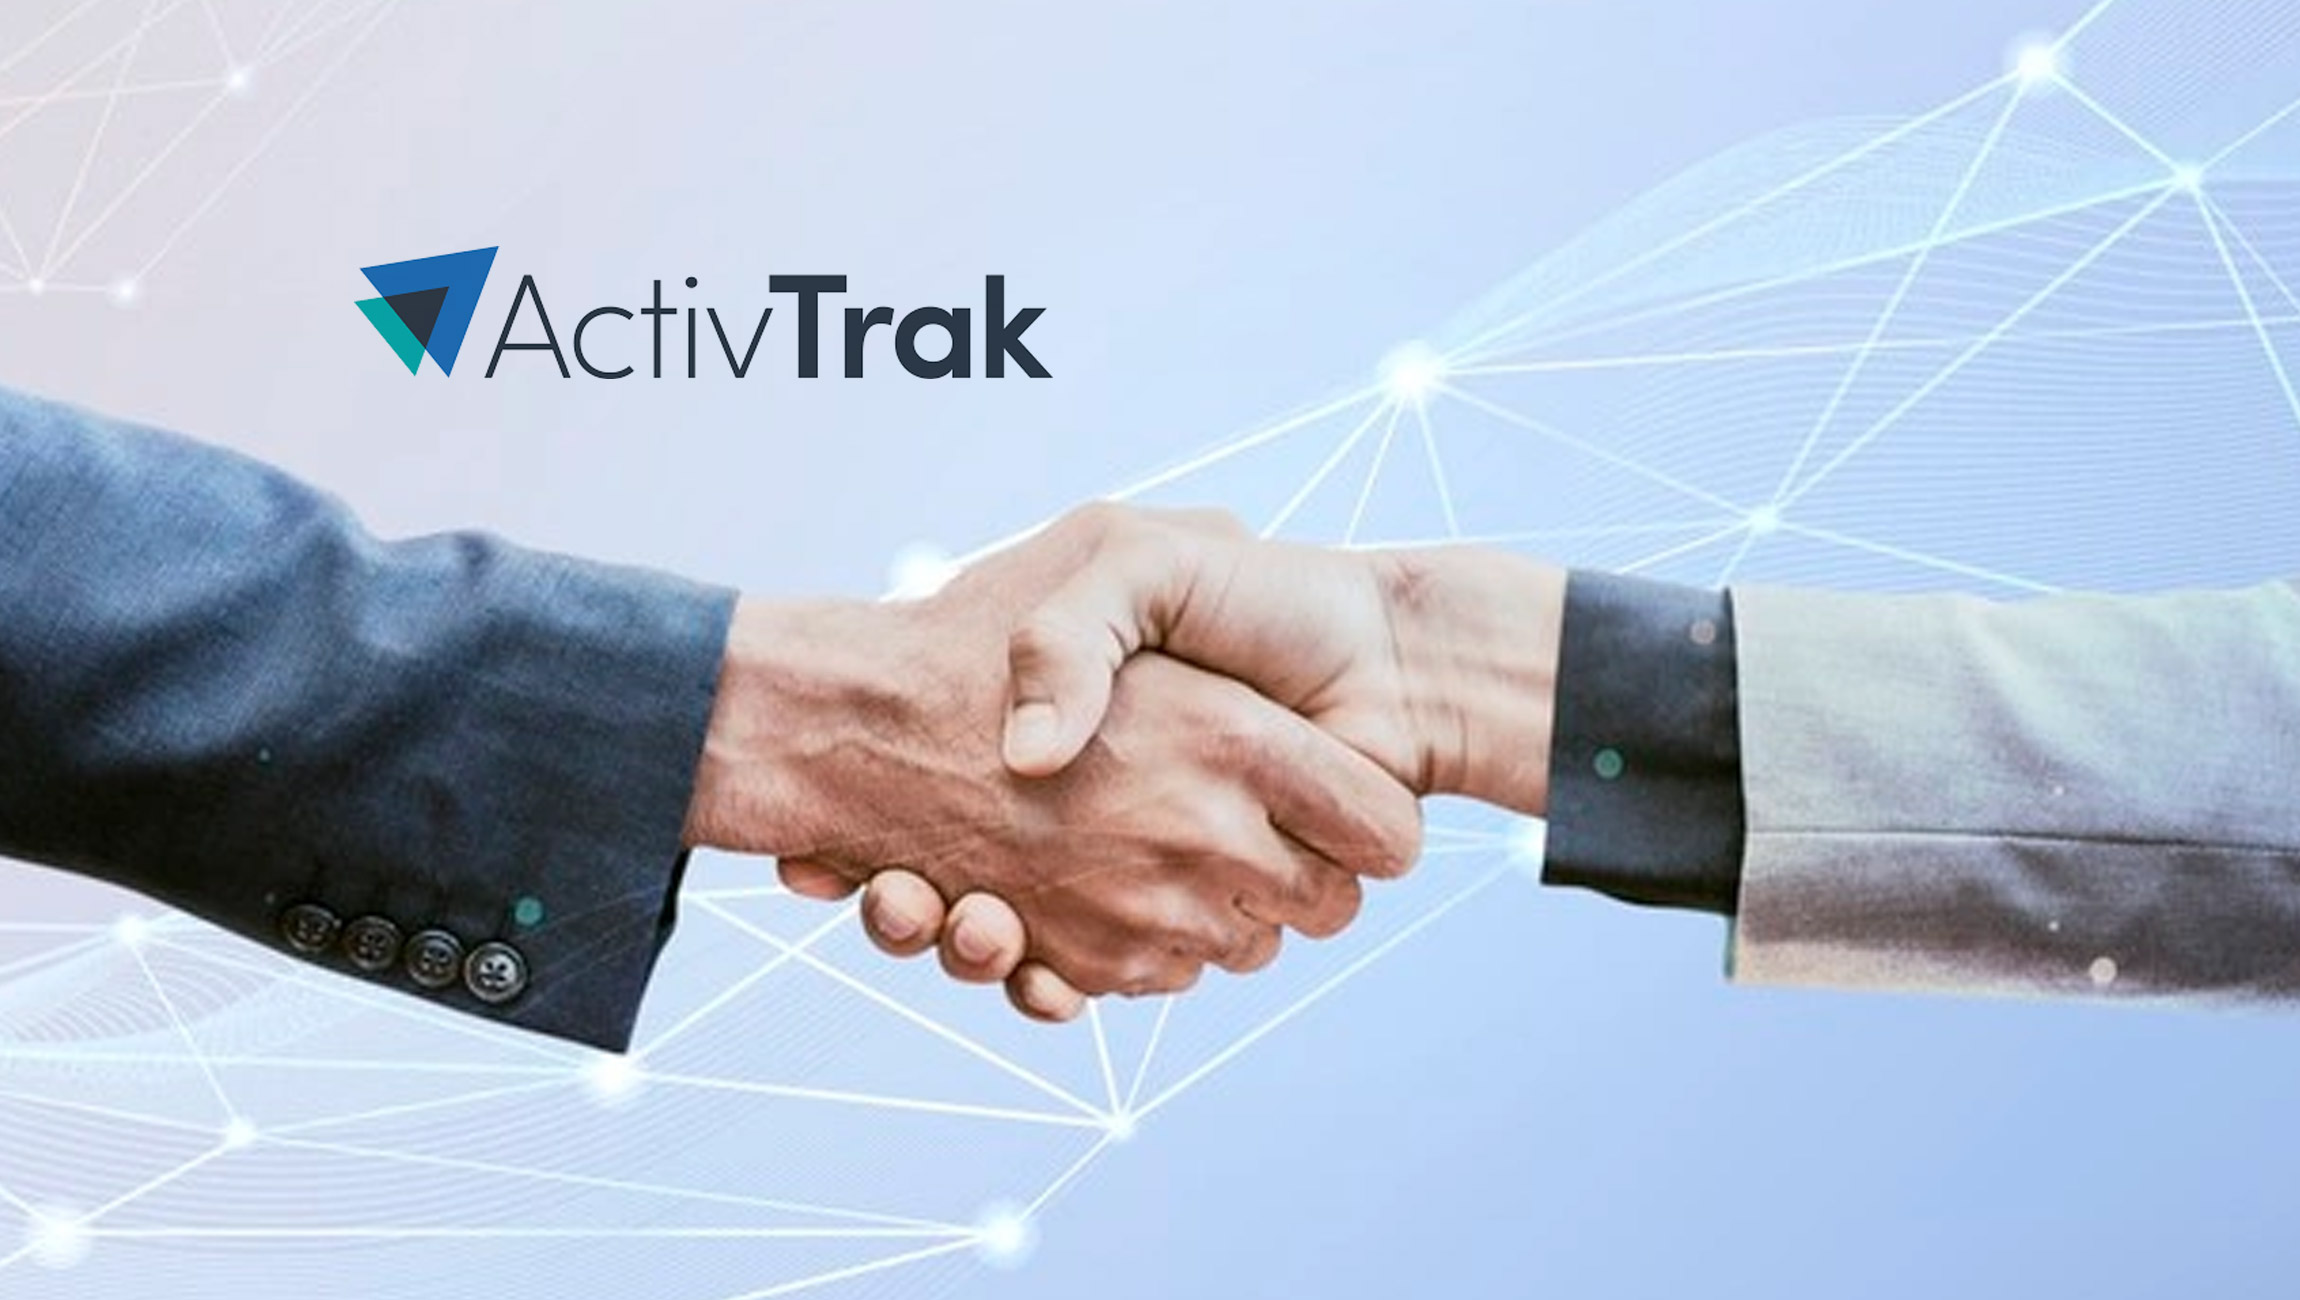 ActivTrak Announces Integration with Salesforce for Sales Productivity Insights